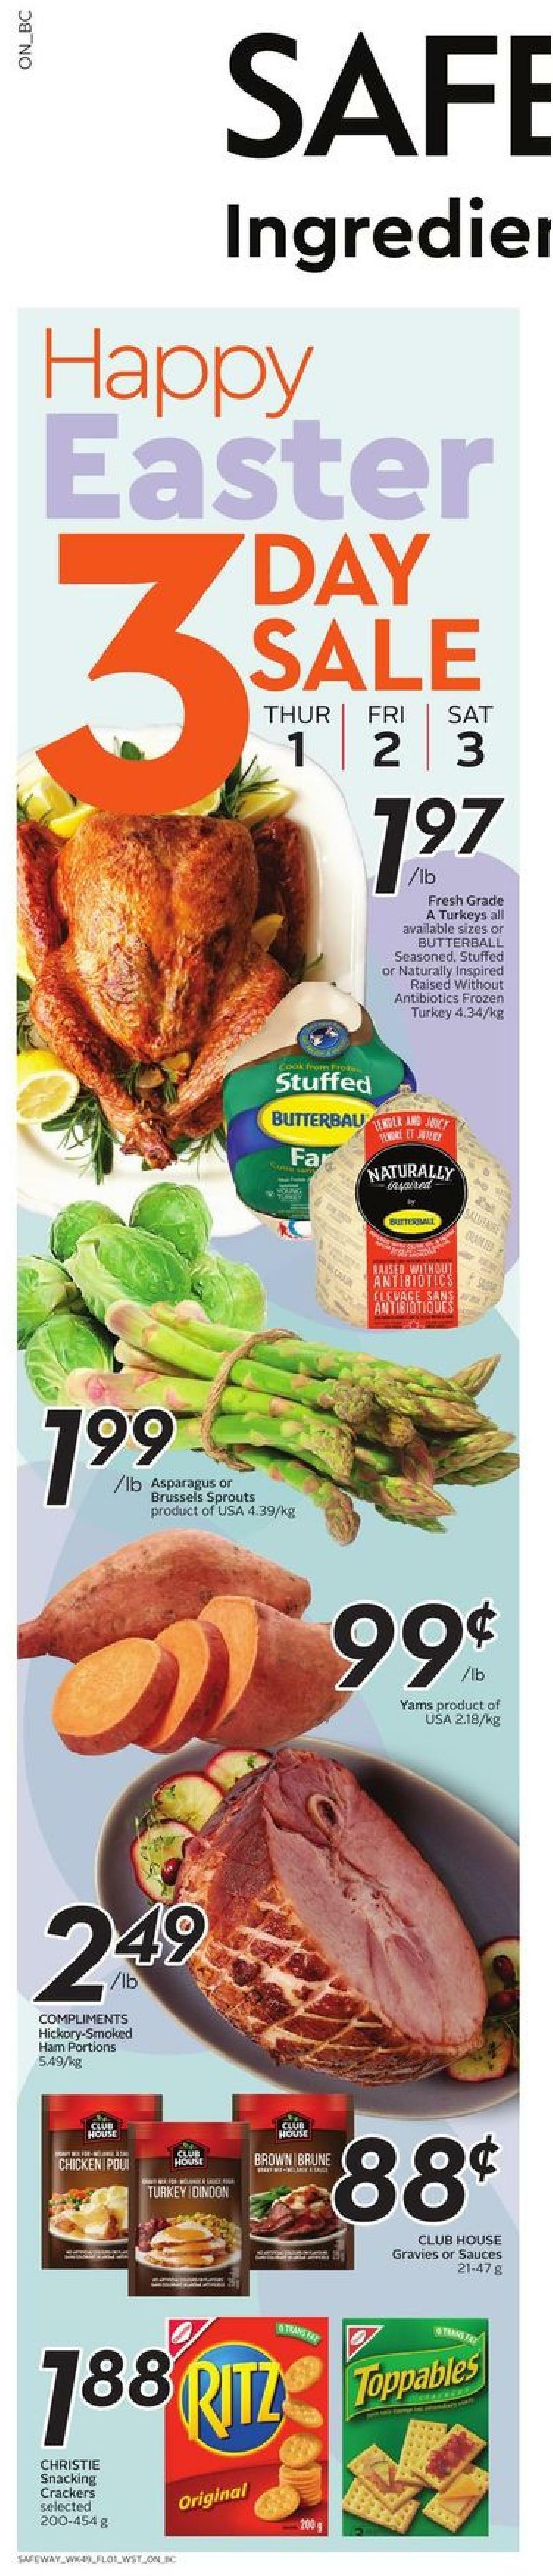 Safeway Flyer from April 1